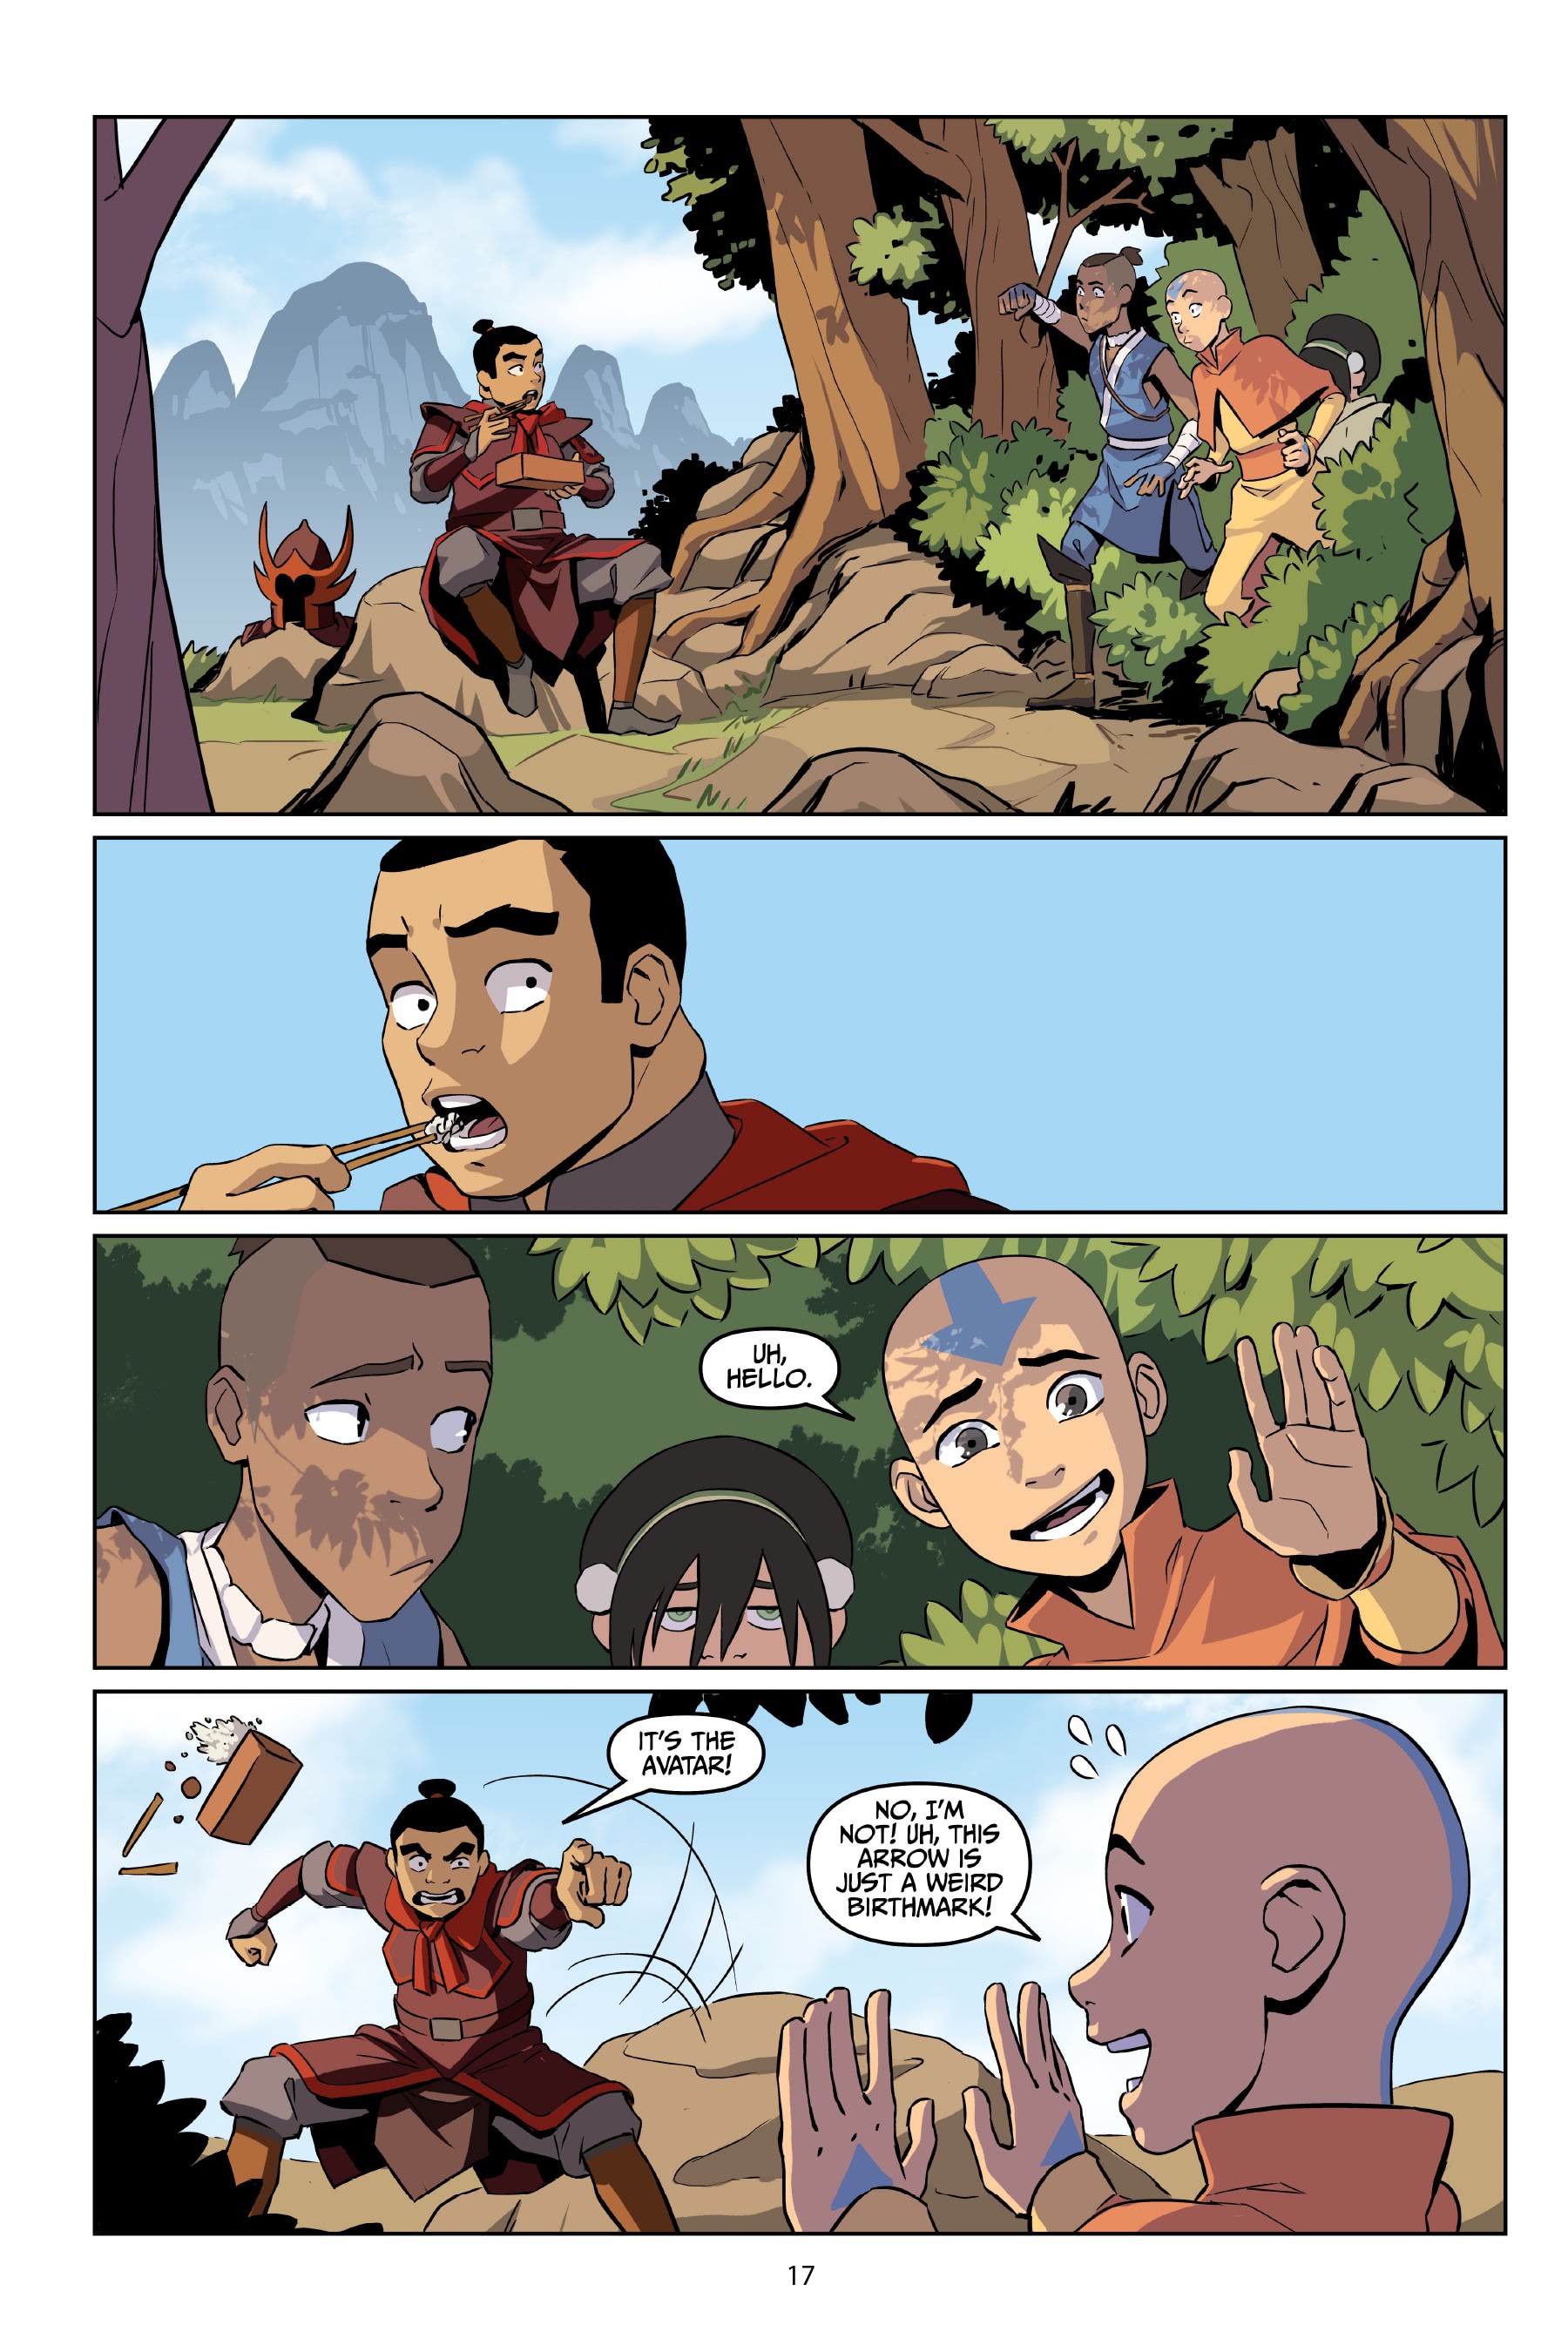 Read online Avatar: The Last Airbender—Katara and the Pirate's Silver comic -  Issue # TPB - 18